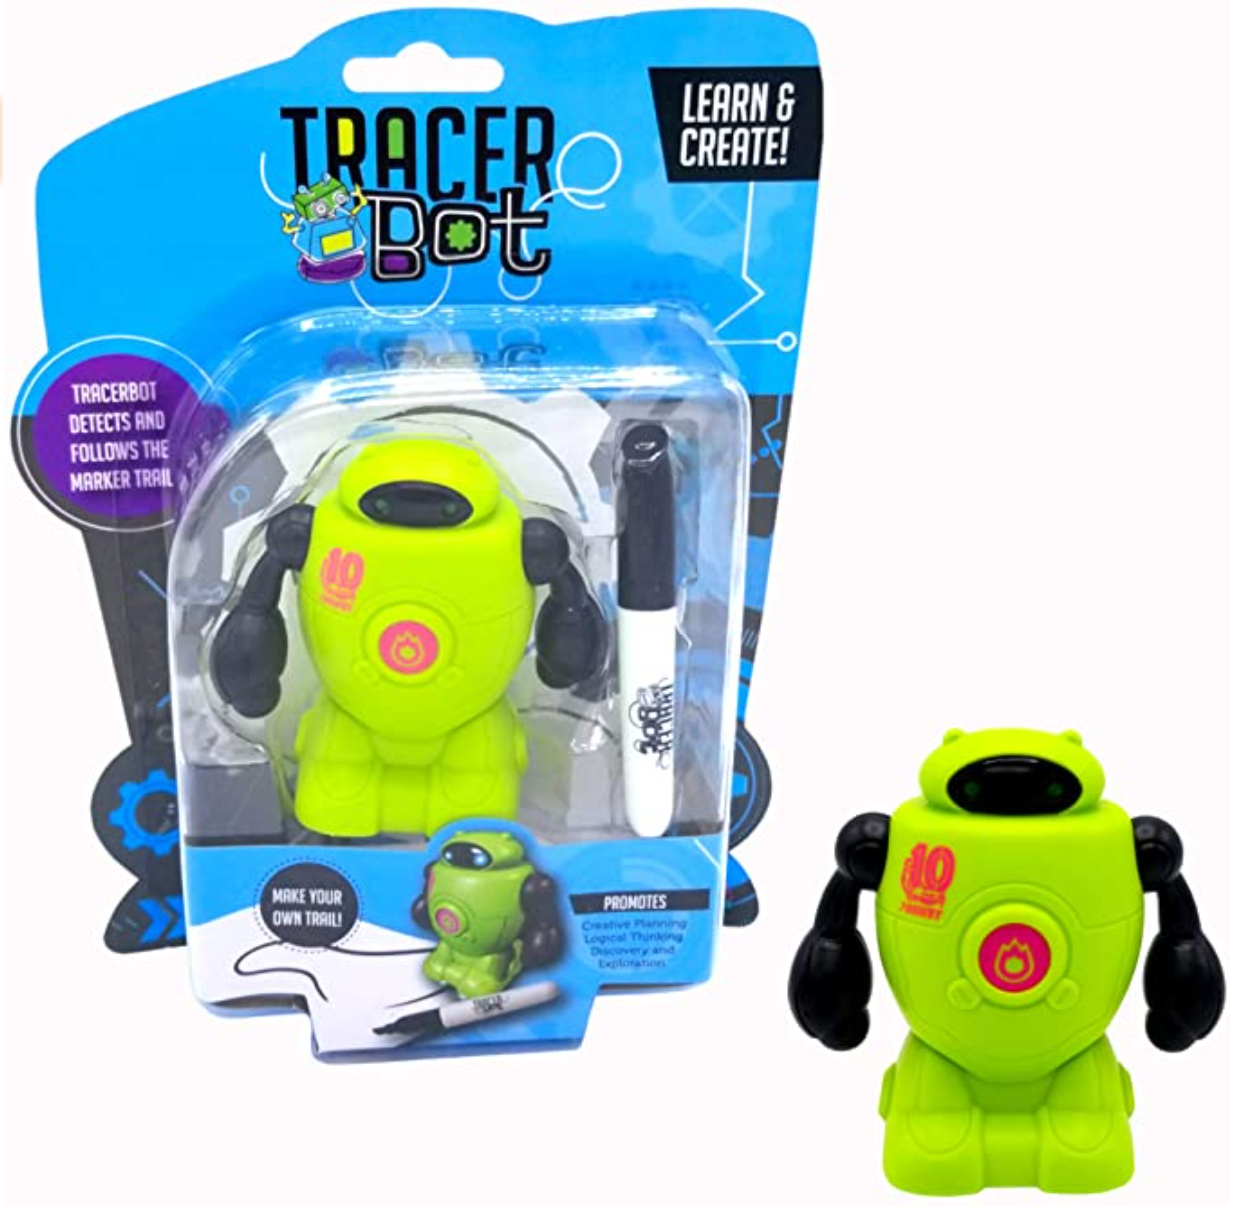 Green TracerBot